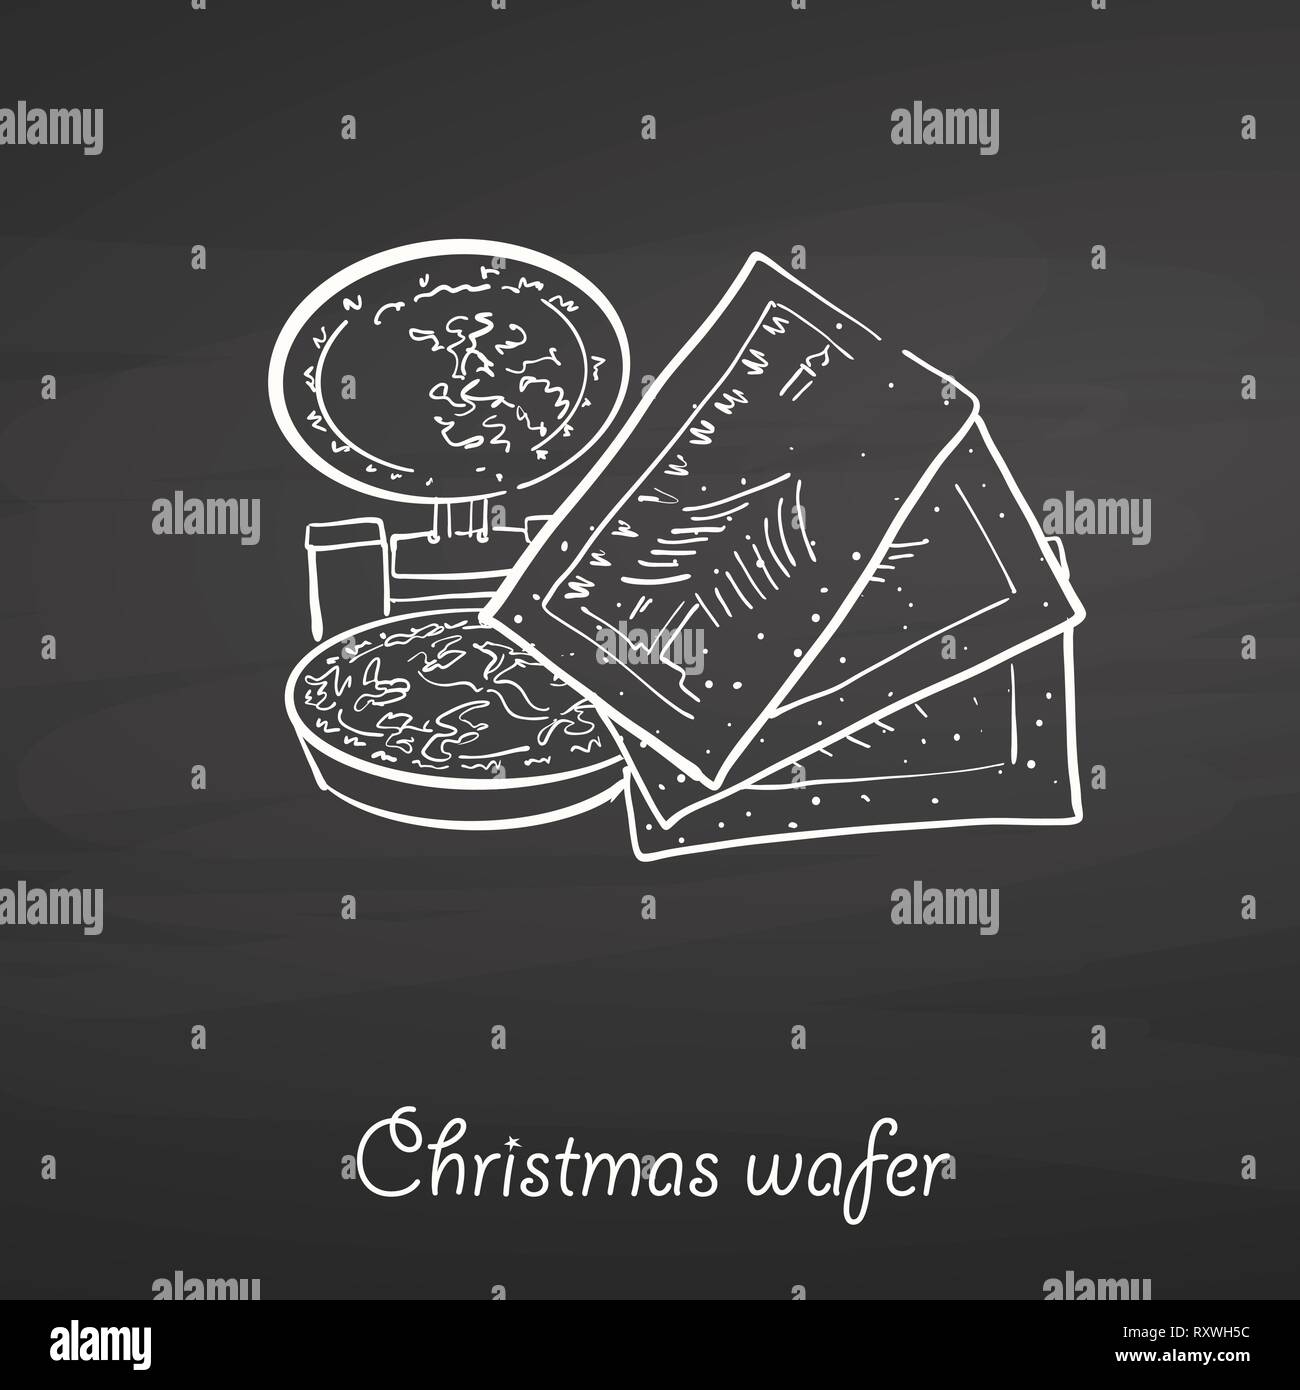 Christmas wafer food sketch on chalkboard. Vector drawing of Crispy bread, usually known in Eastern Europe. Food illustration series. Stock Vector